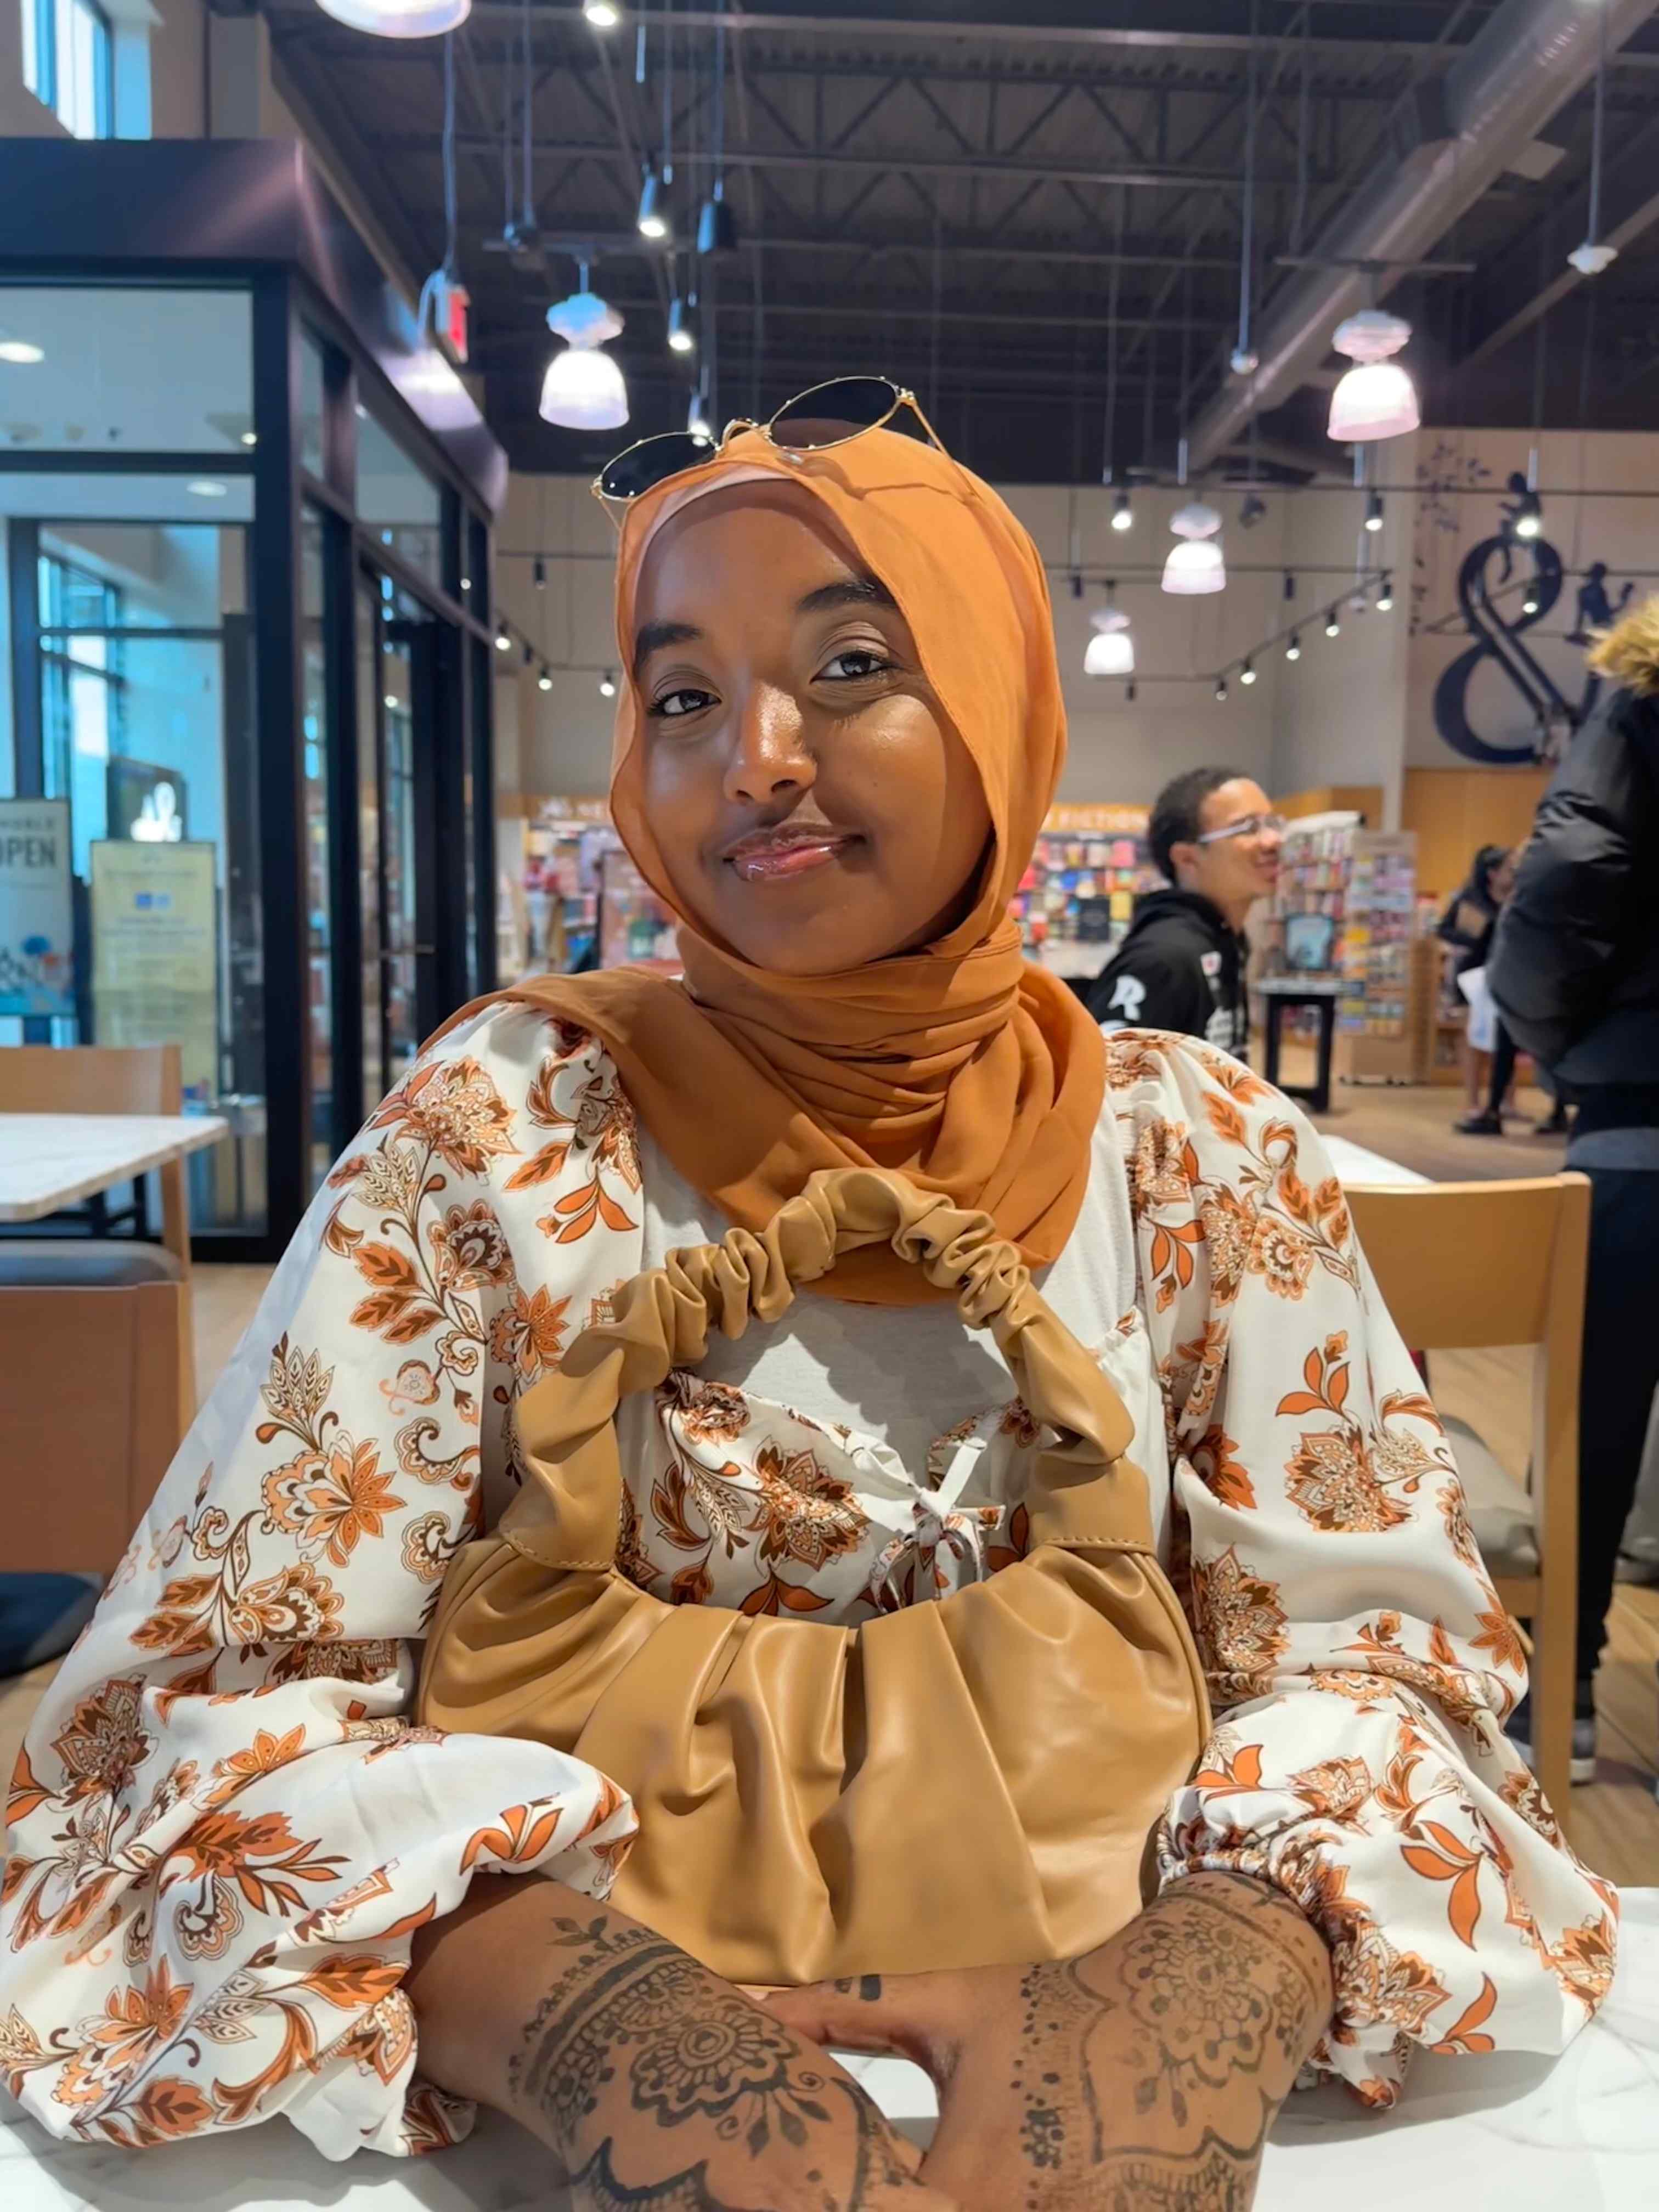 A photo of Aseel wearing an orange head scarf with sunglasses on top and a floral shirt sitting at a restaurant.